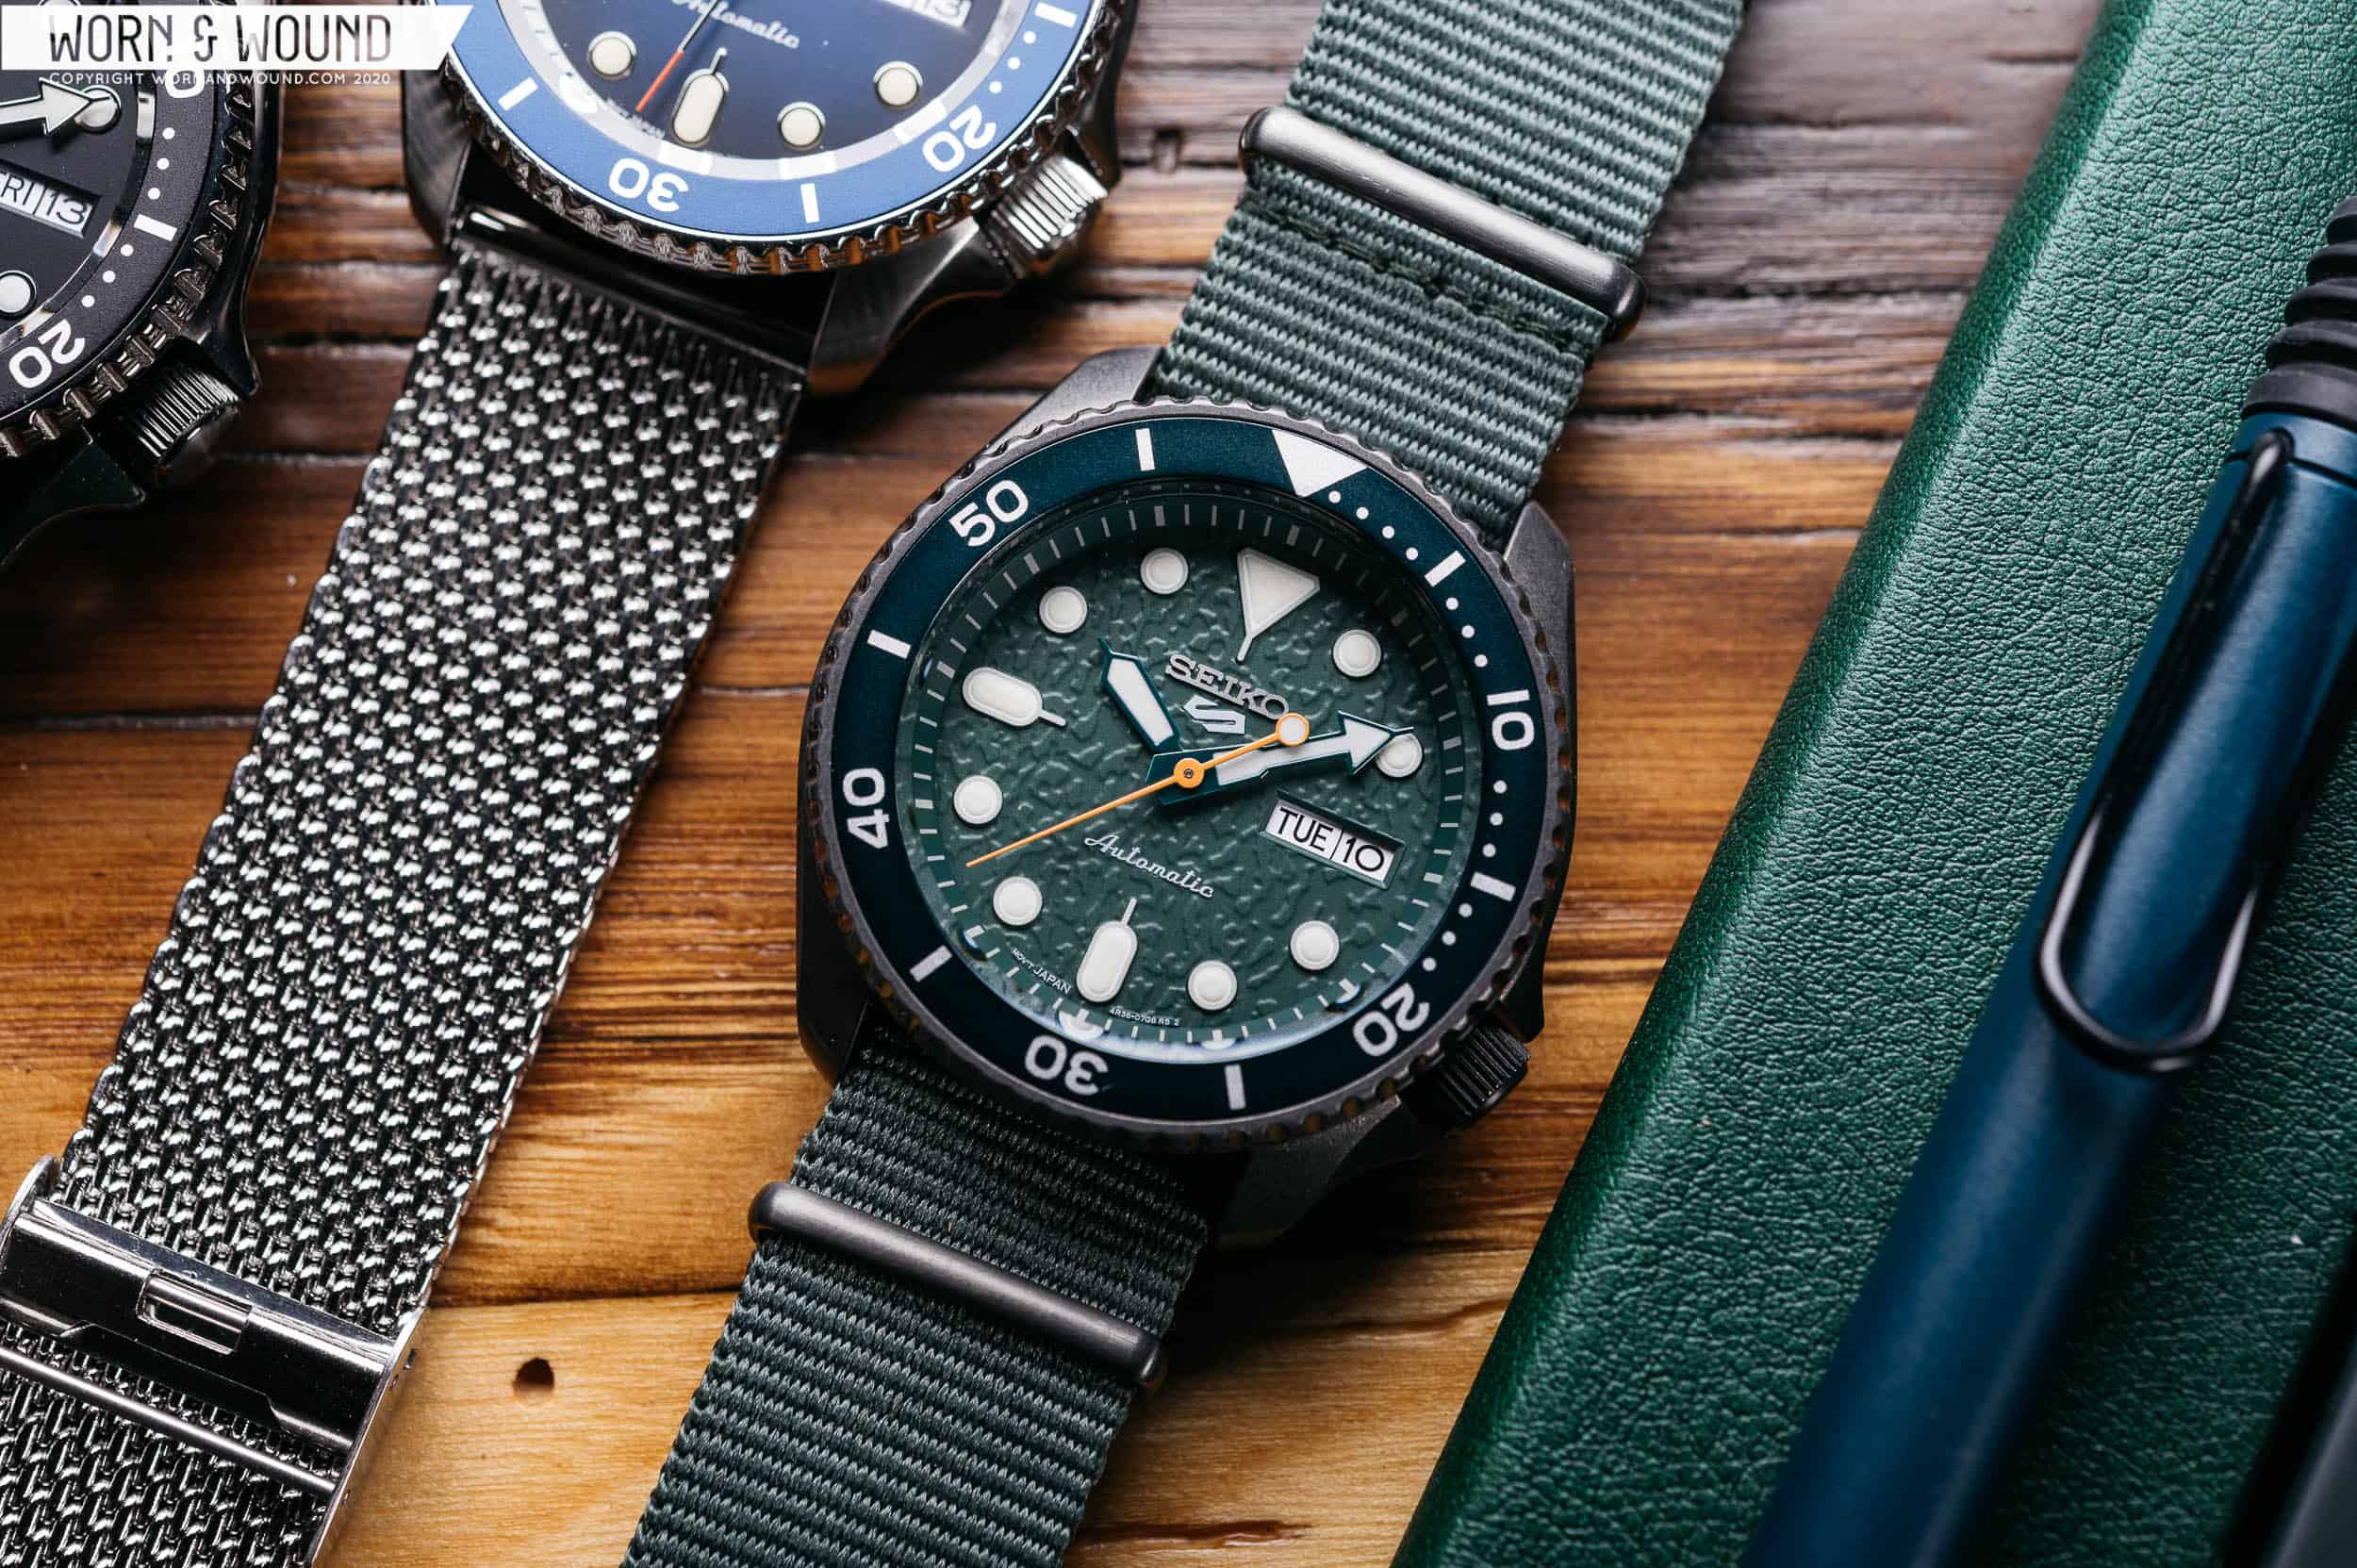 Review: Seiko 5 Sports SRPD Dive Watches - Worn & Wound